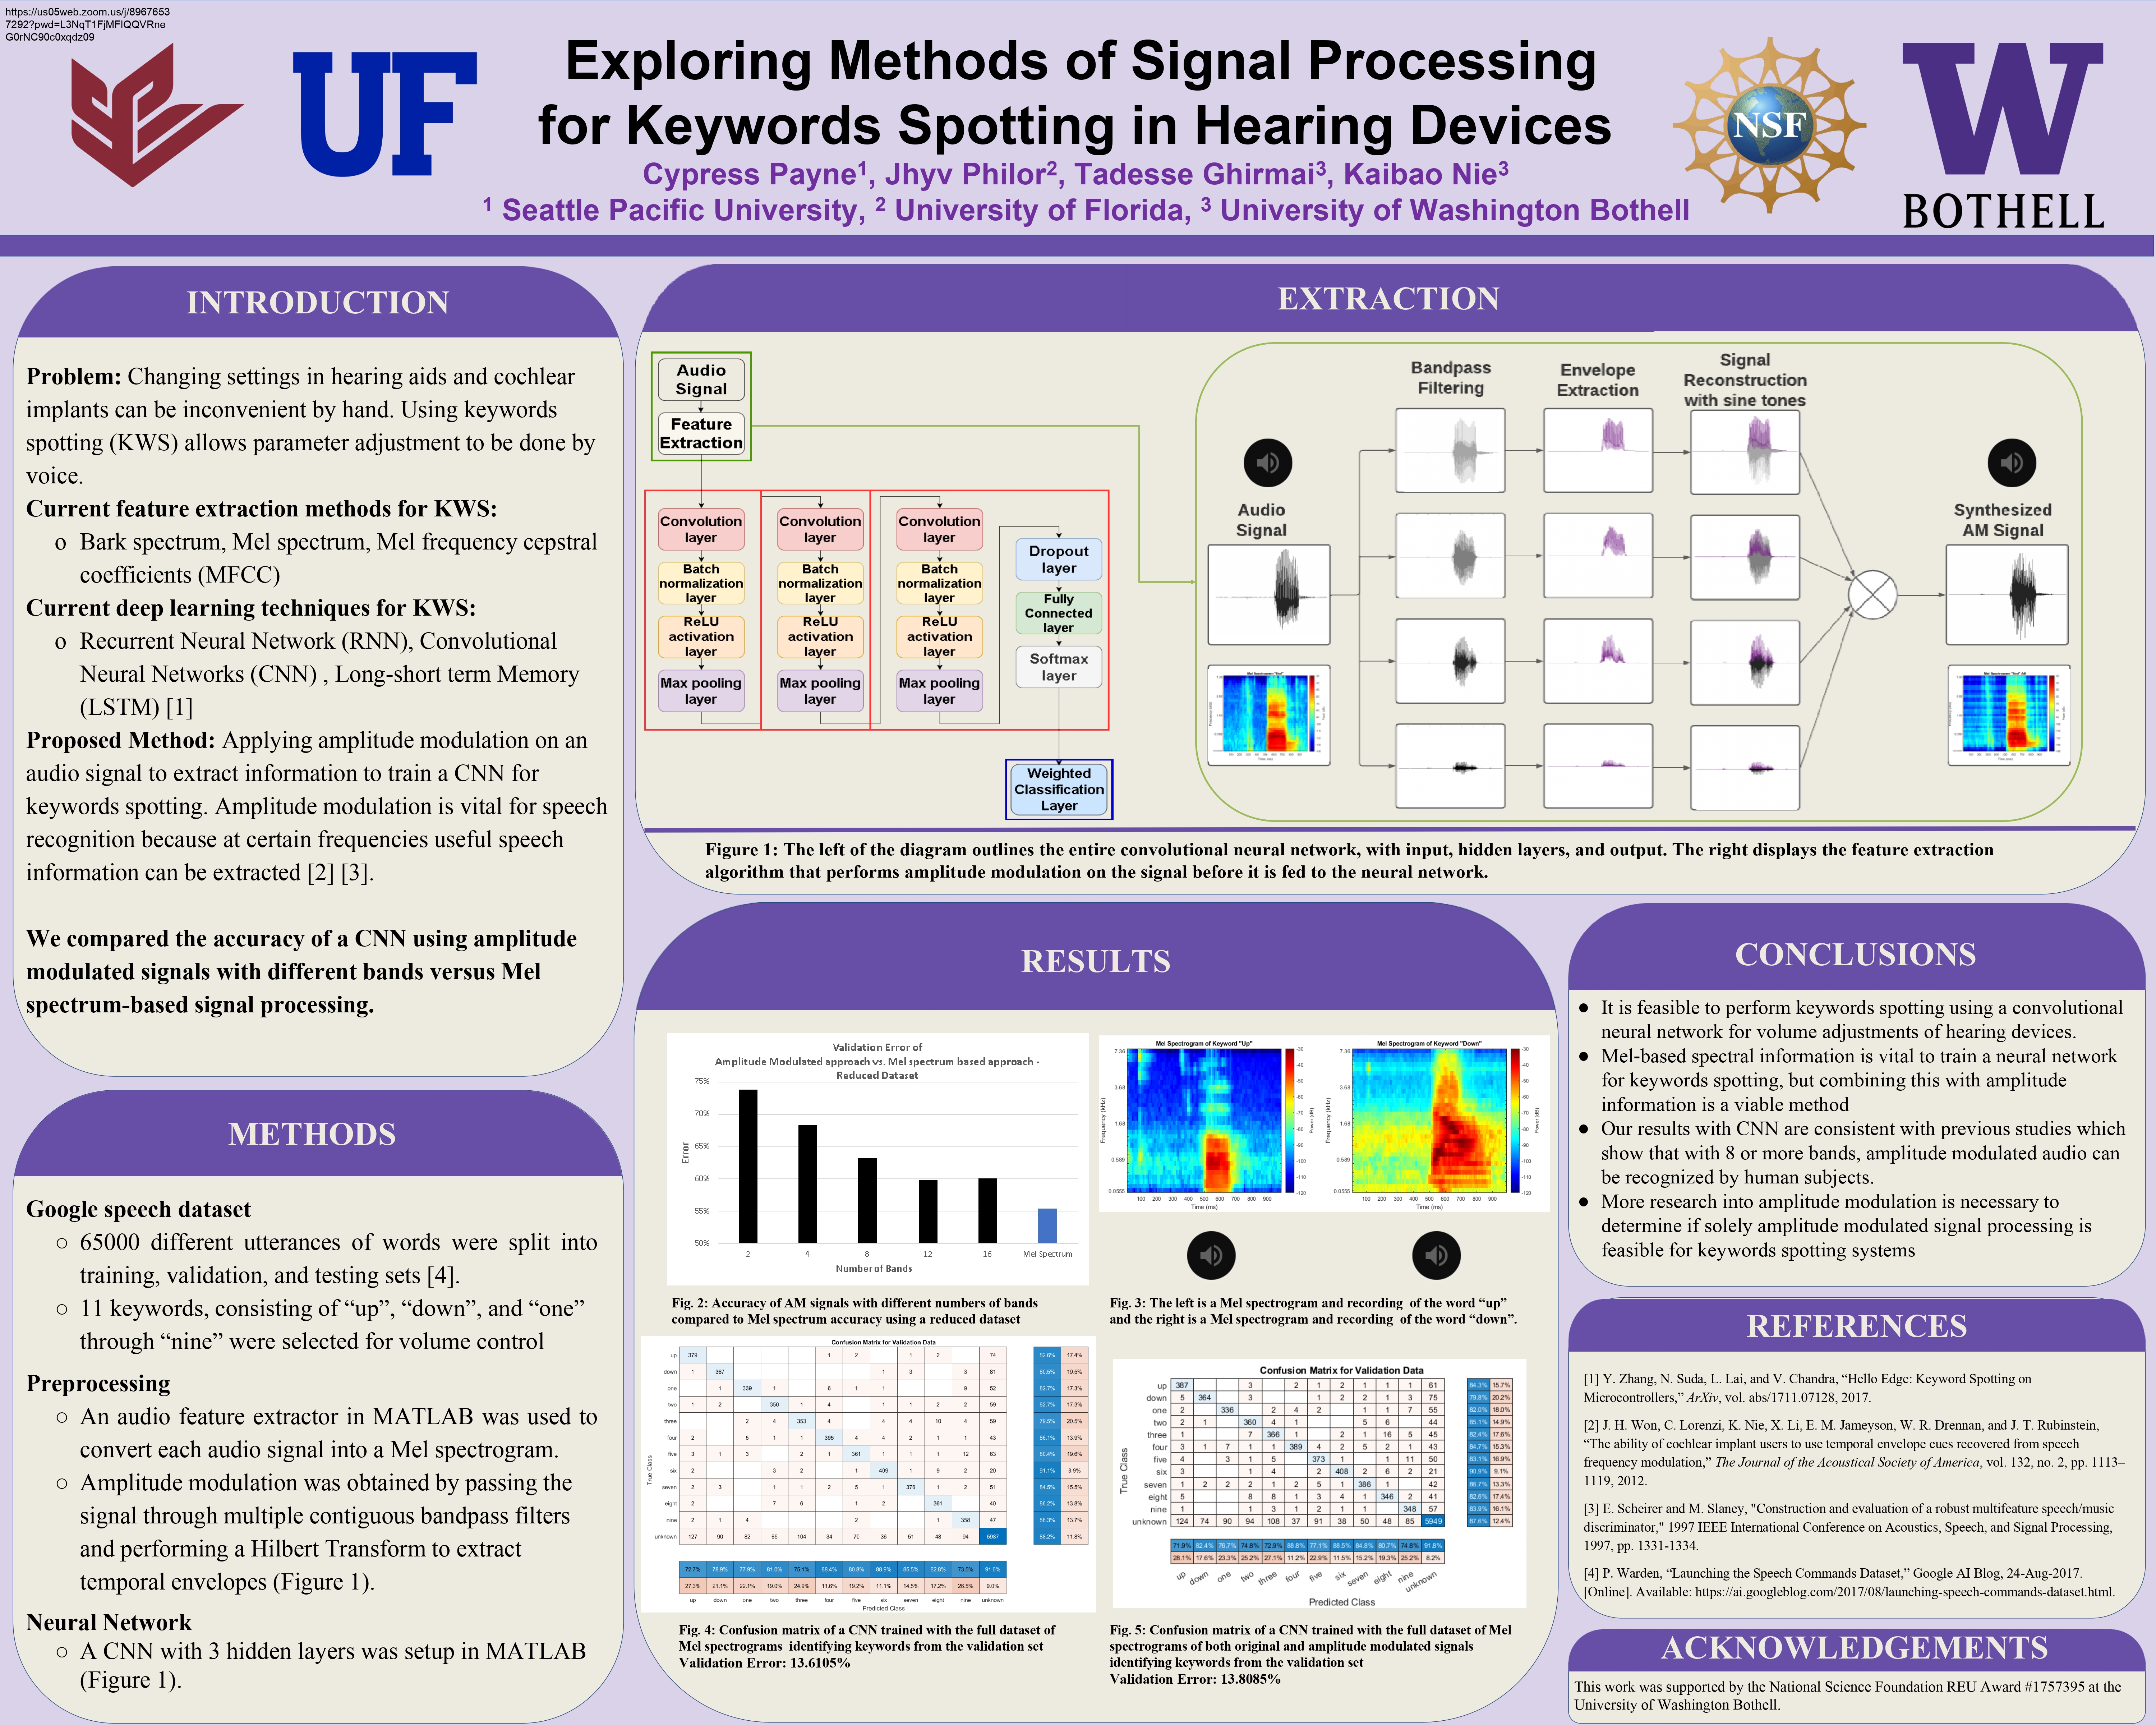 Exploring Methods of Signal Processing for Keywords Spotting in Hearing Devices Poster